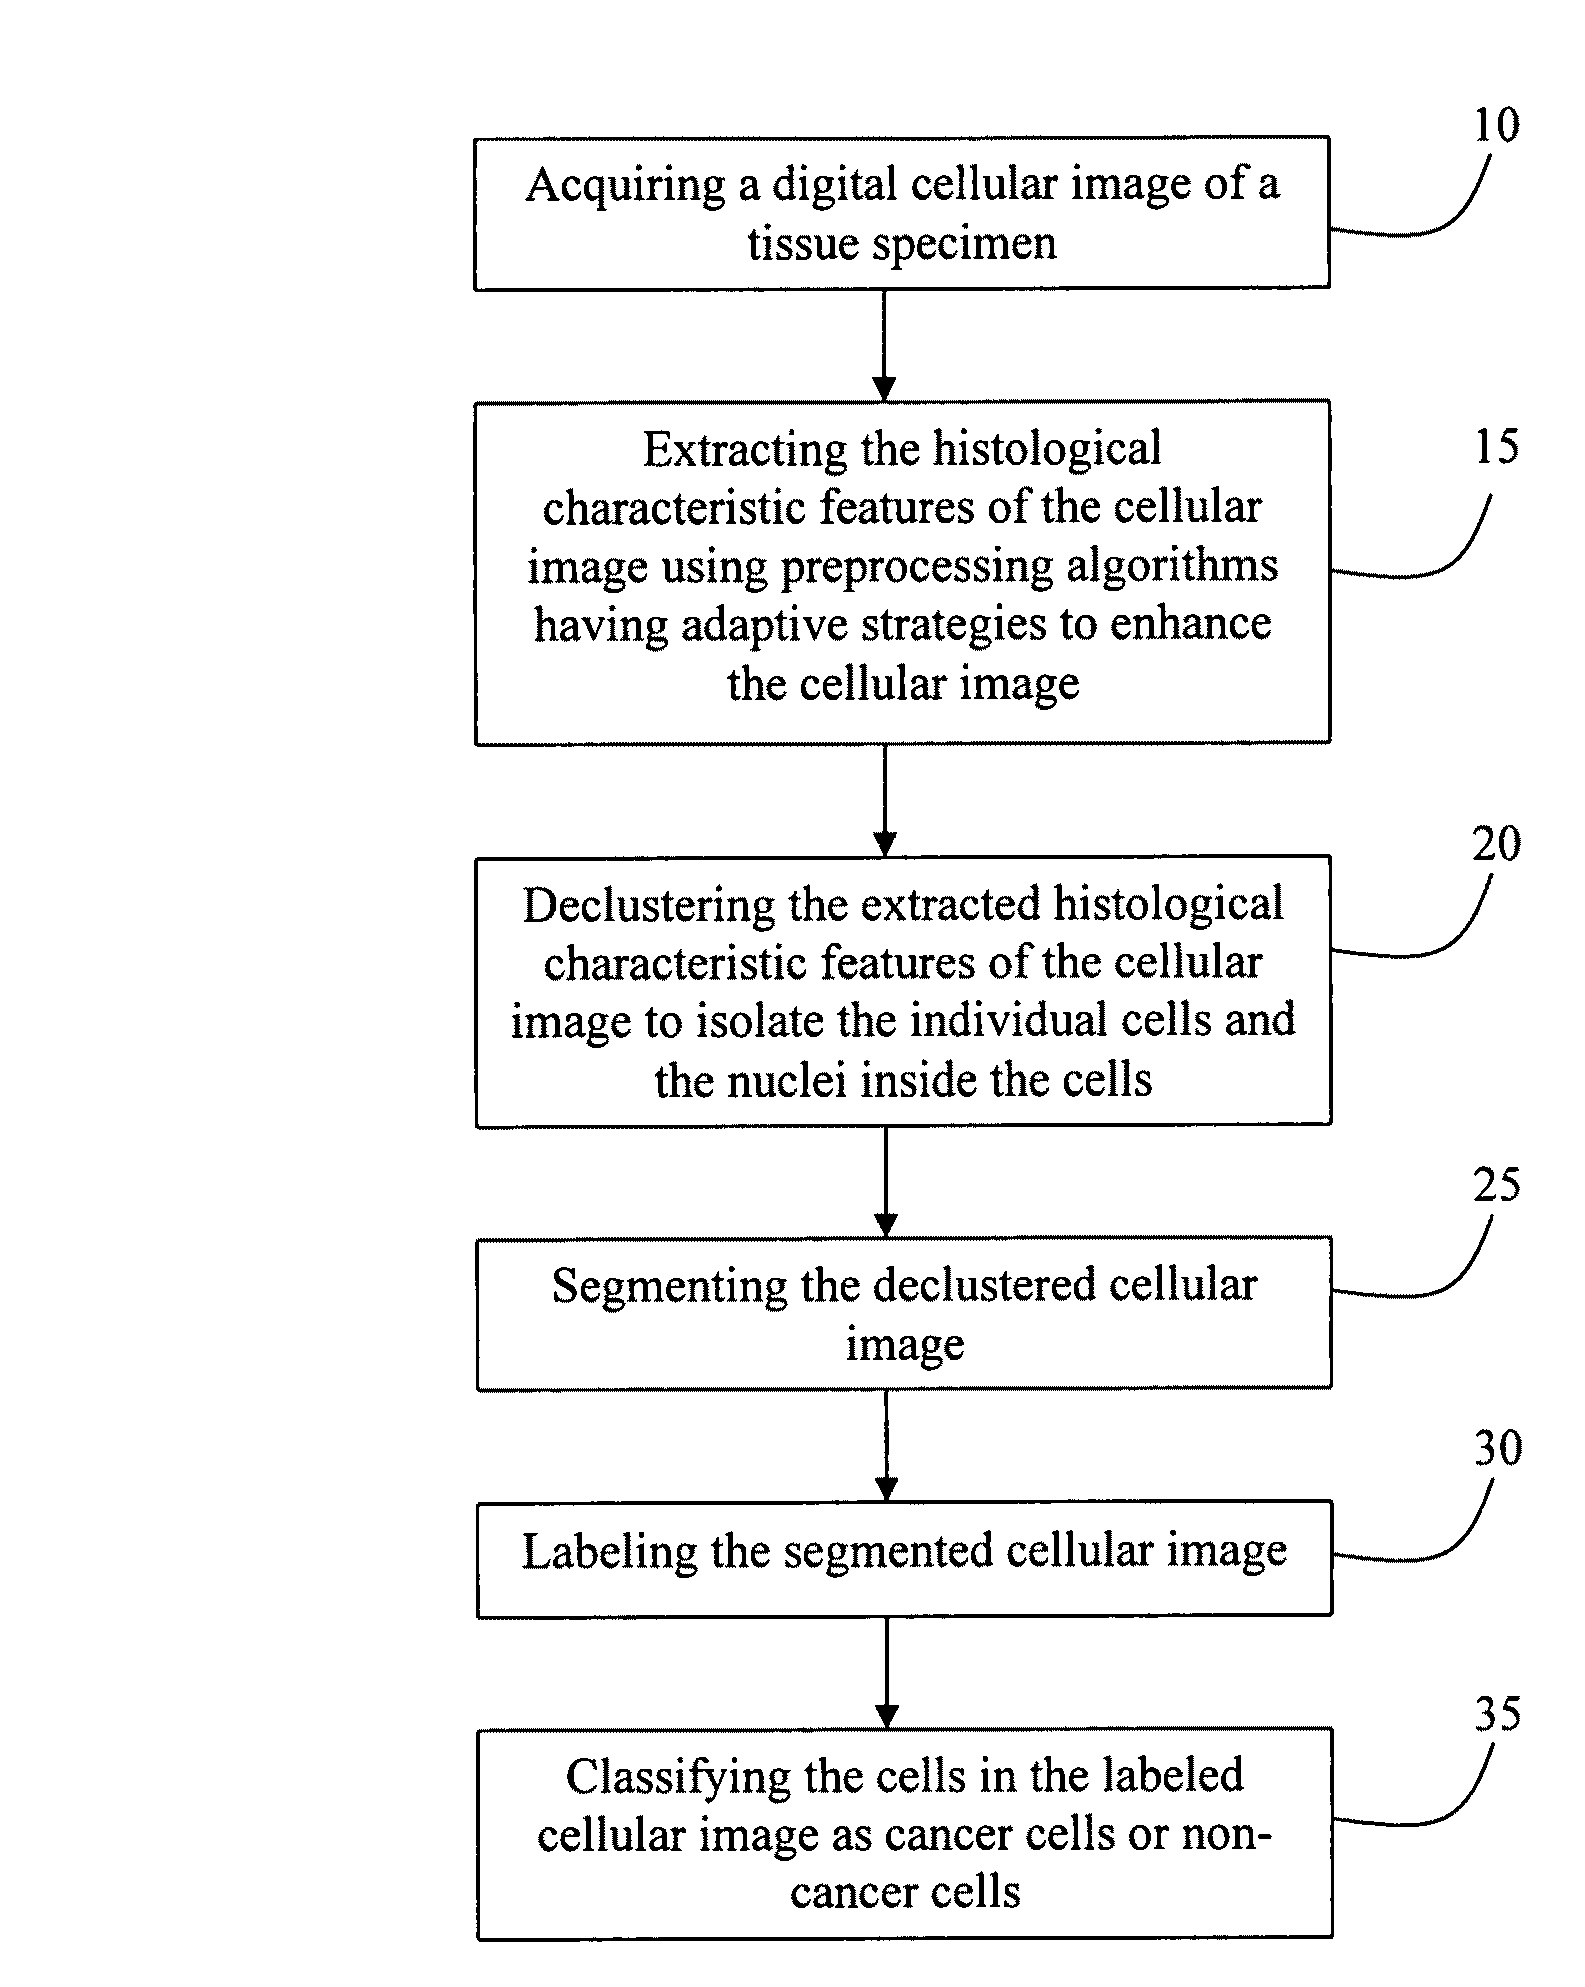 Computer-aided pathological diagnosis system